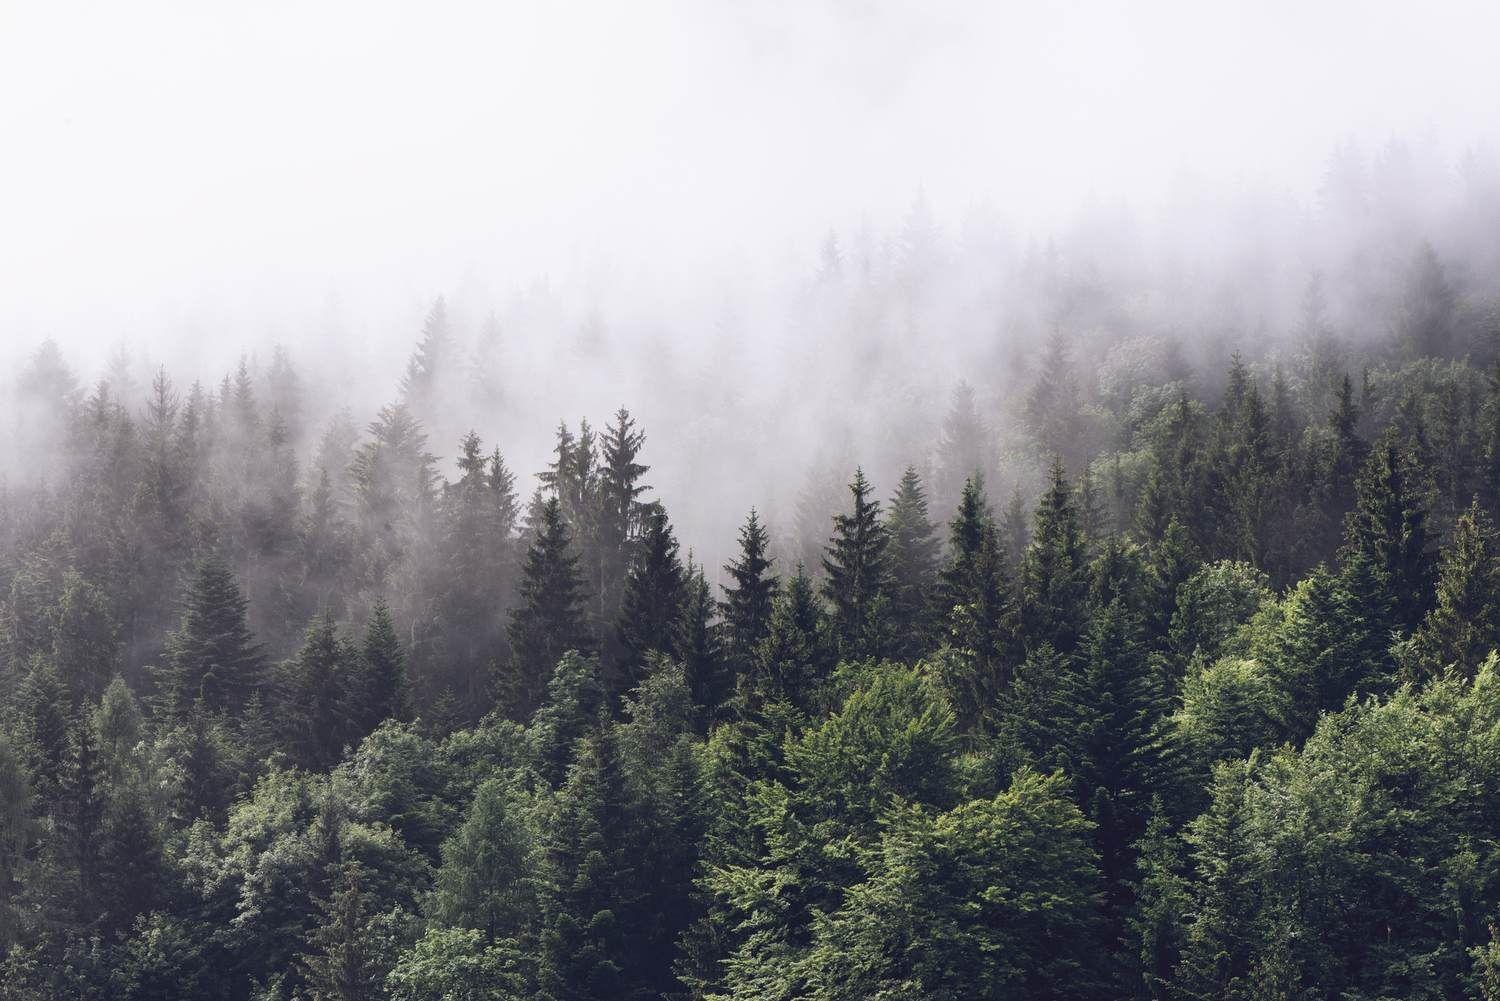 A foggy forest with pine trees - Foggy forest